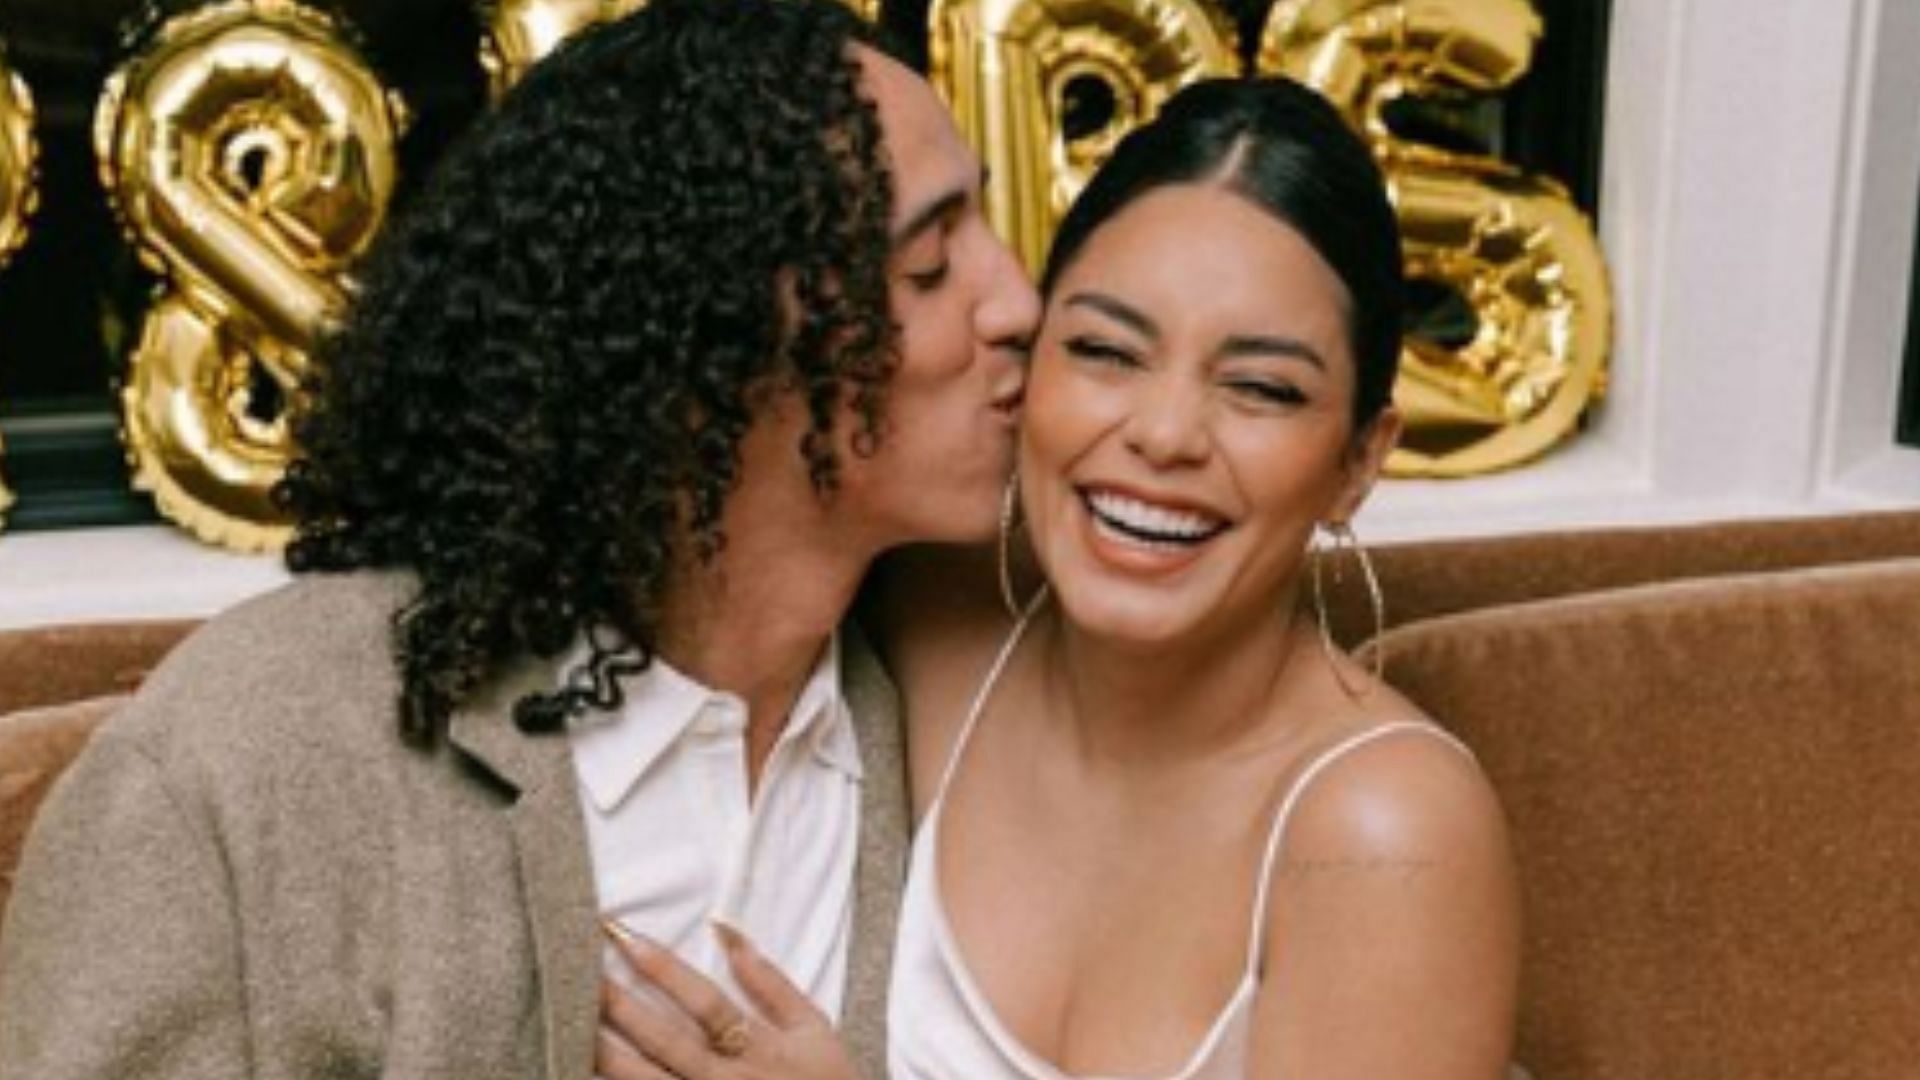 Inside MLB star Cole Tucker's relationship with Vanessa Hudgens, from first  meeting on Zoom to 'Paris engagement